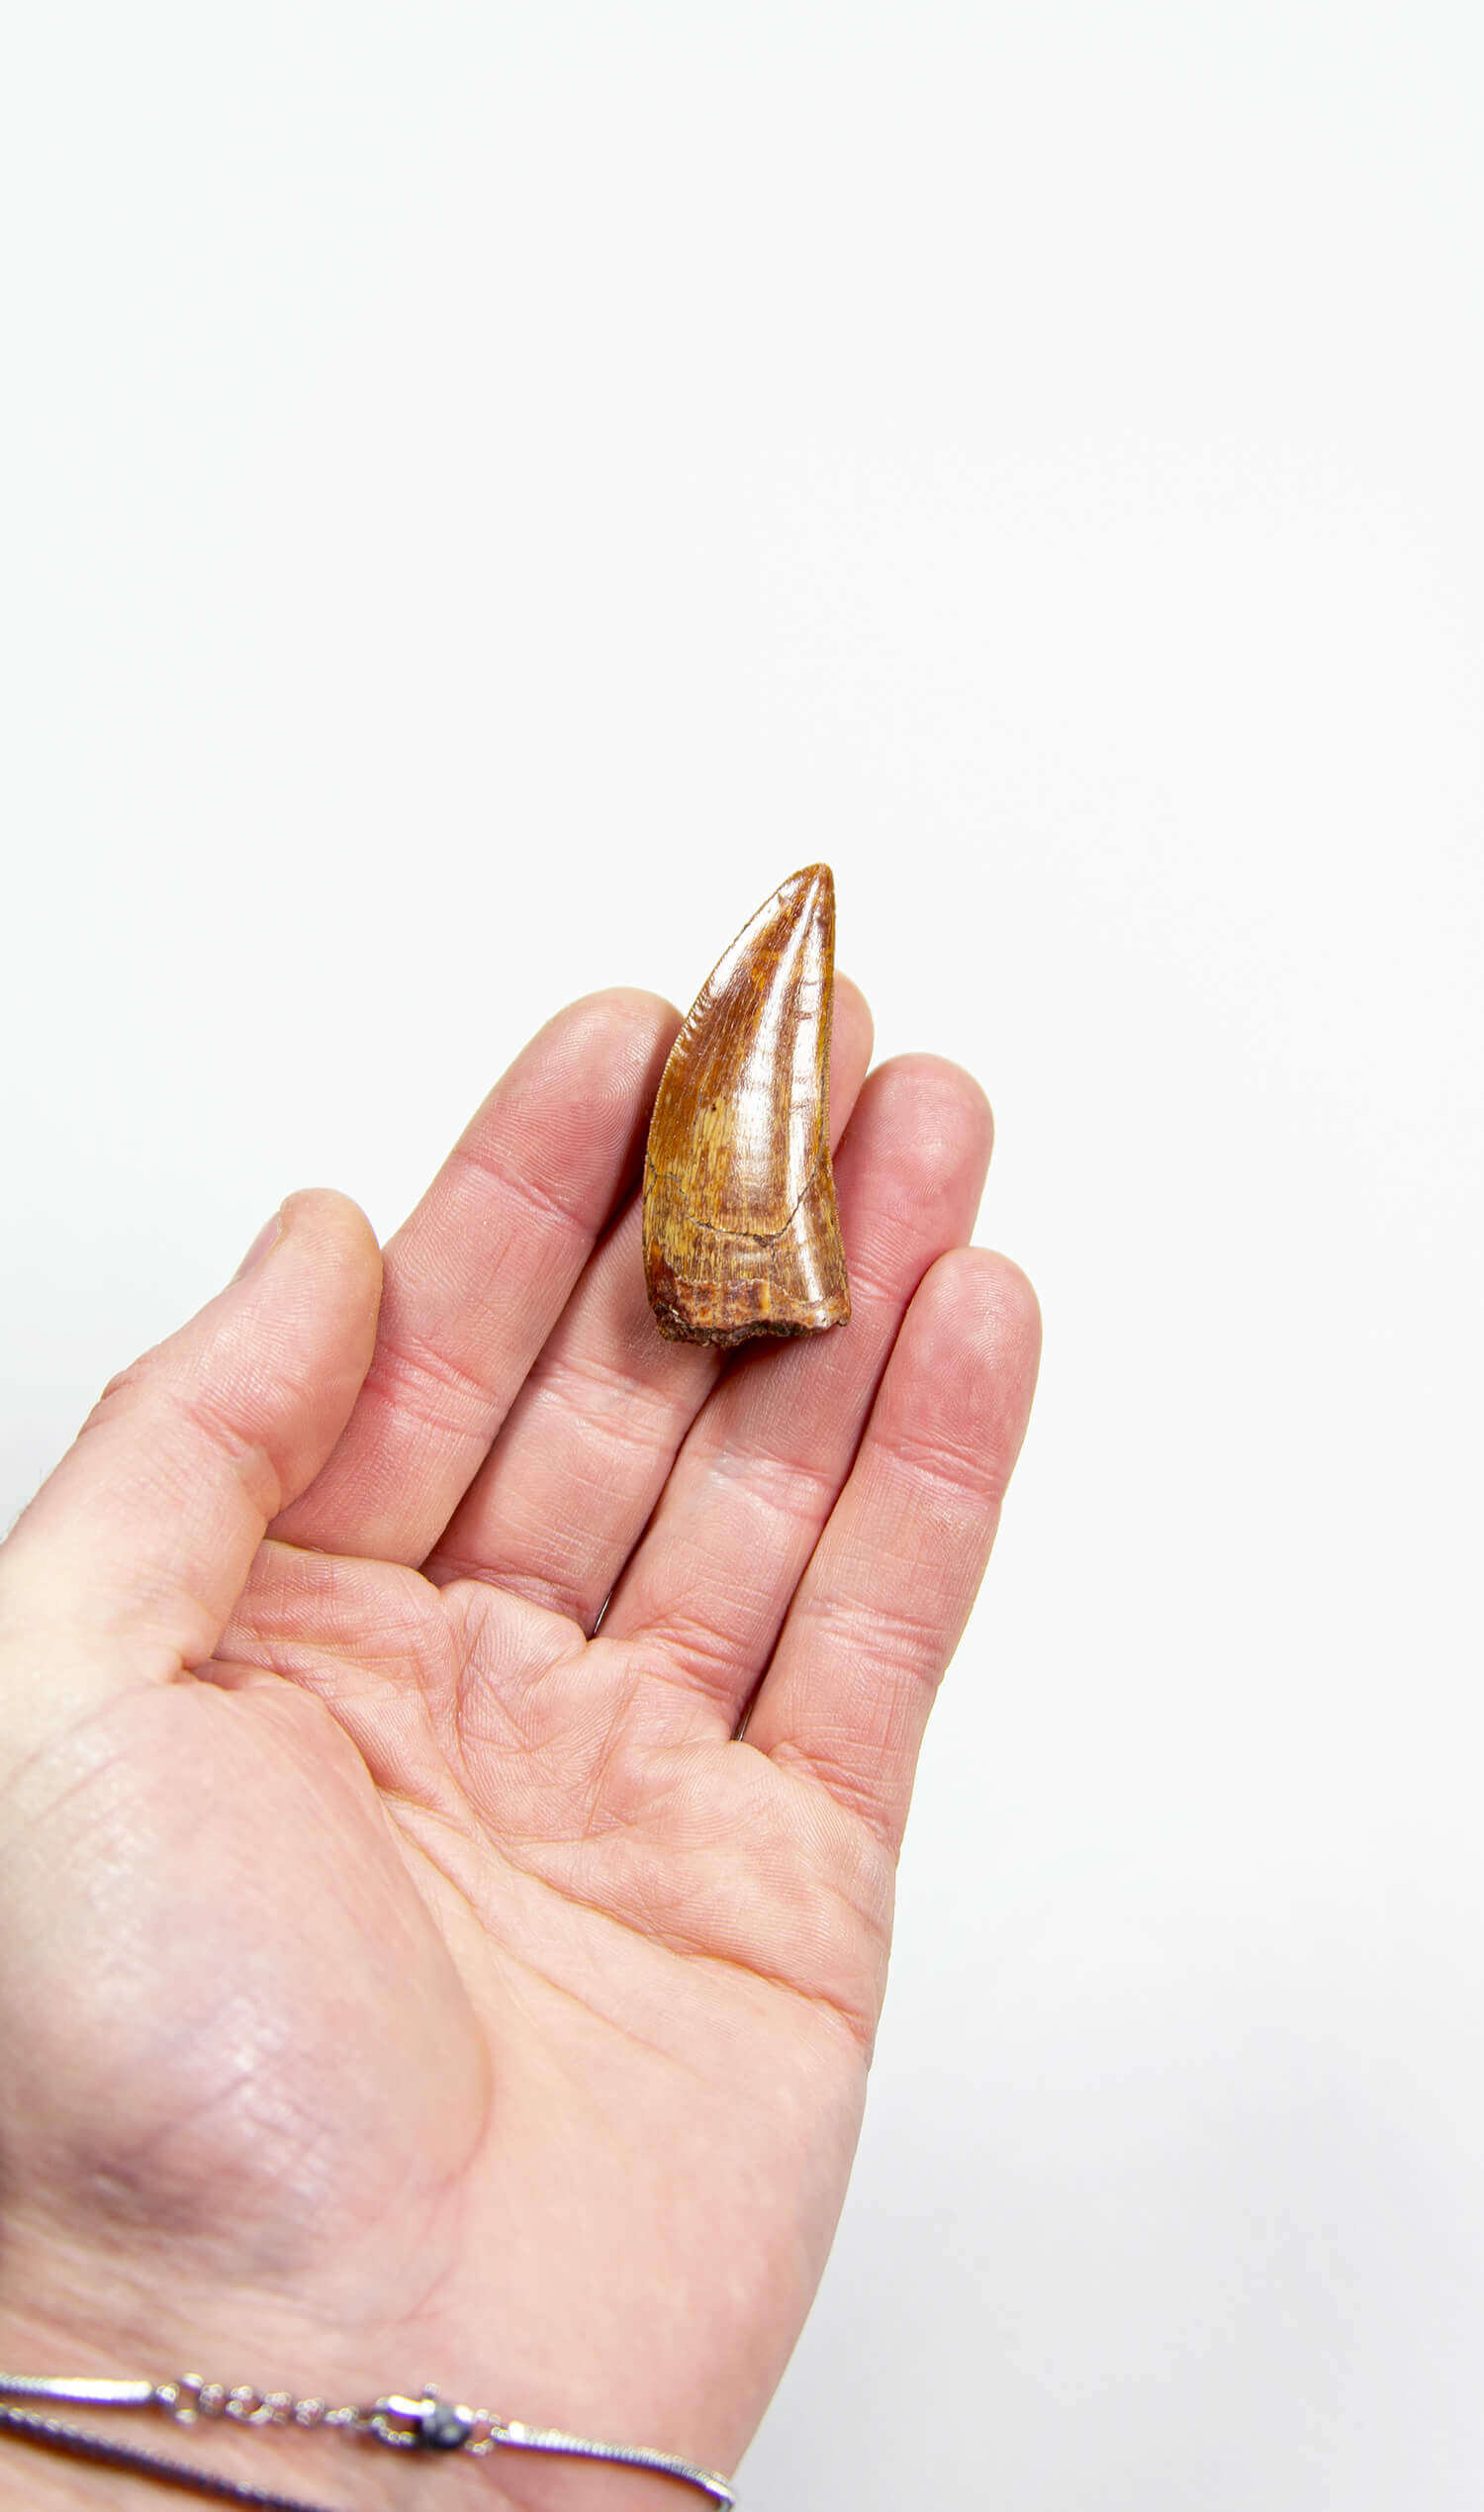 real fossil dinosaur carcharodontosaurus tooth for sale at the uk fossil store 64